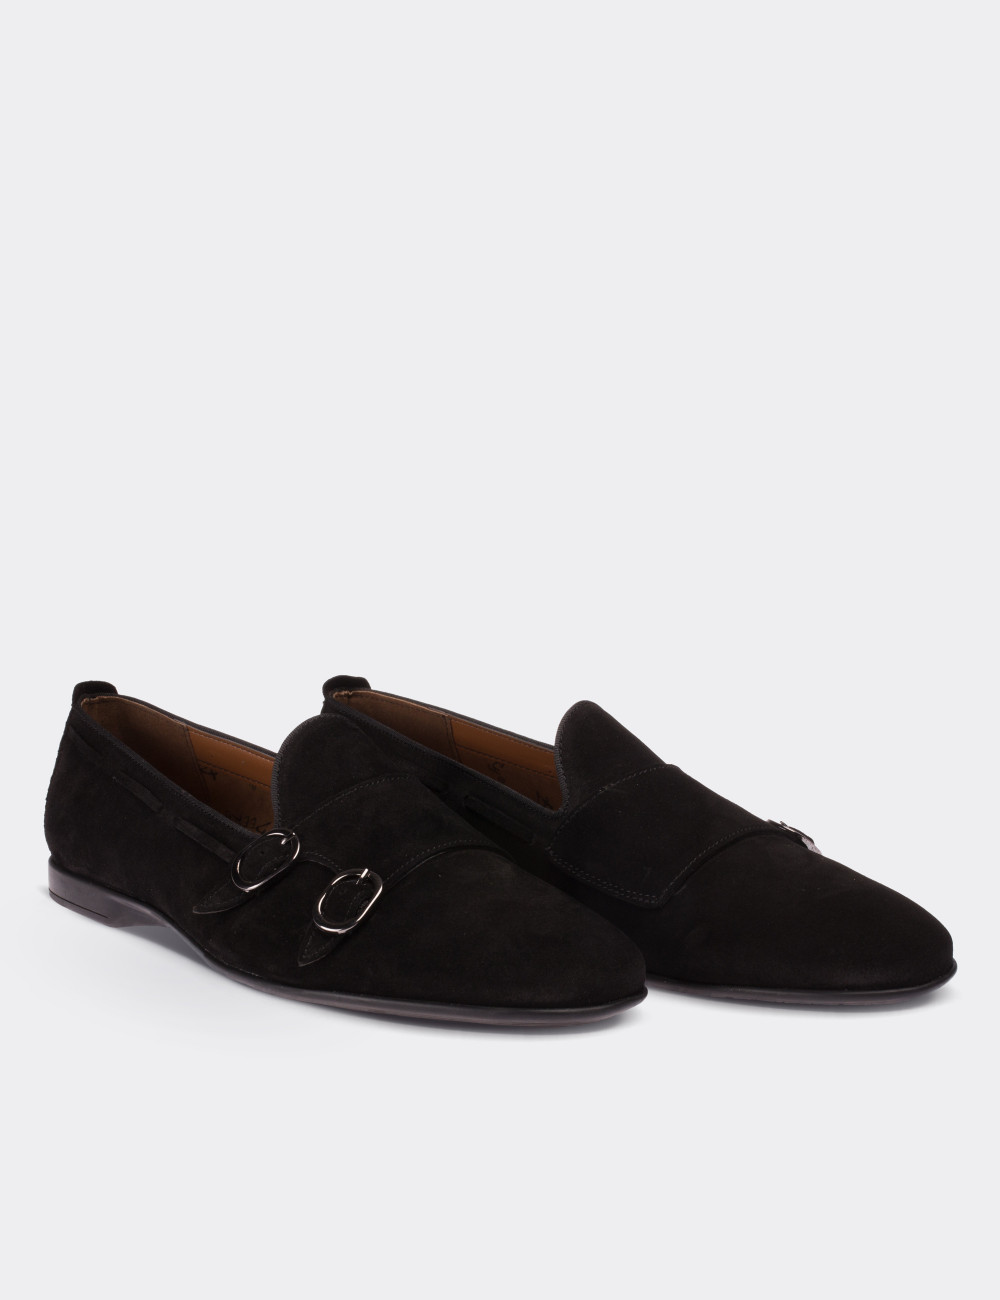 Black Suede Leather Loafers - 01646MSYHC01